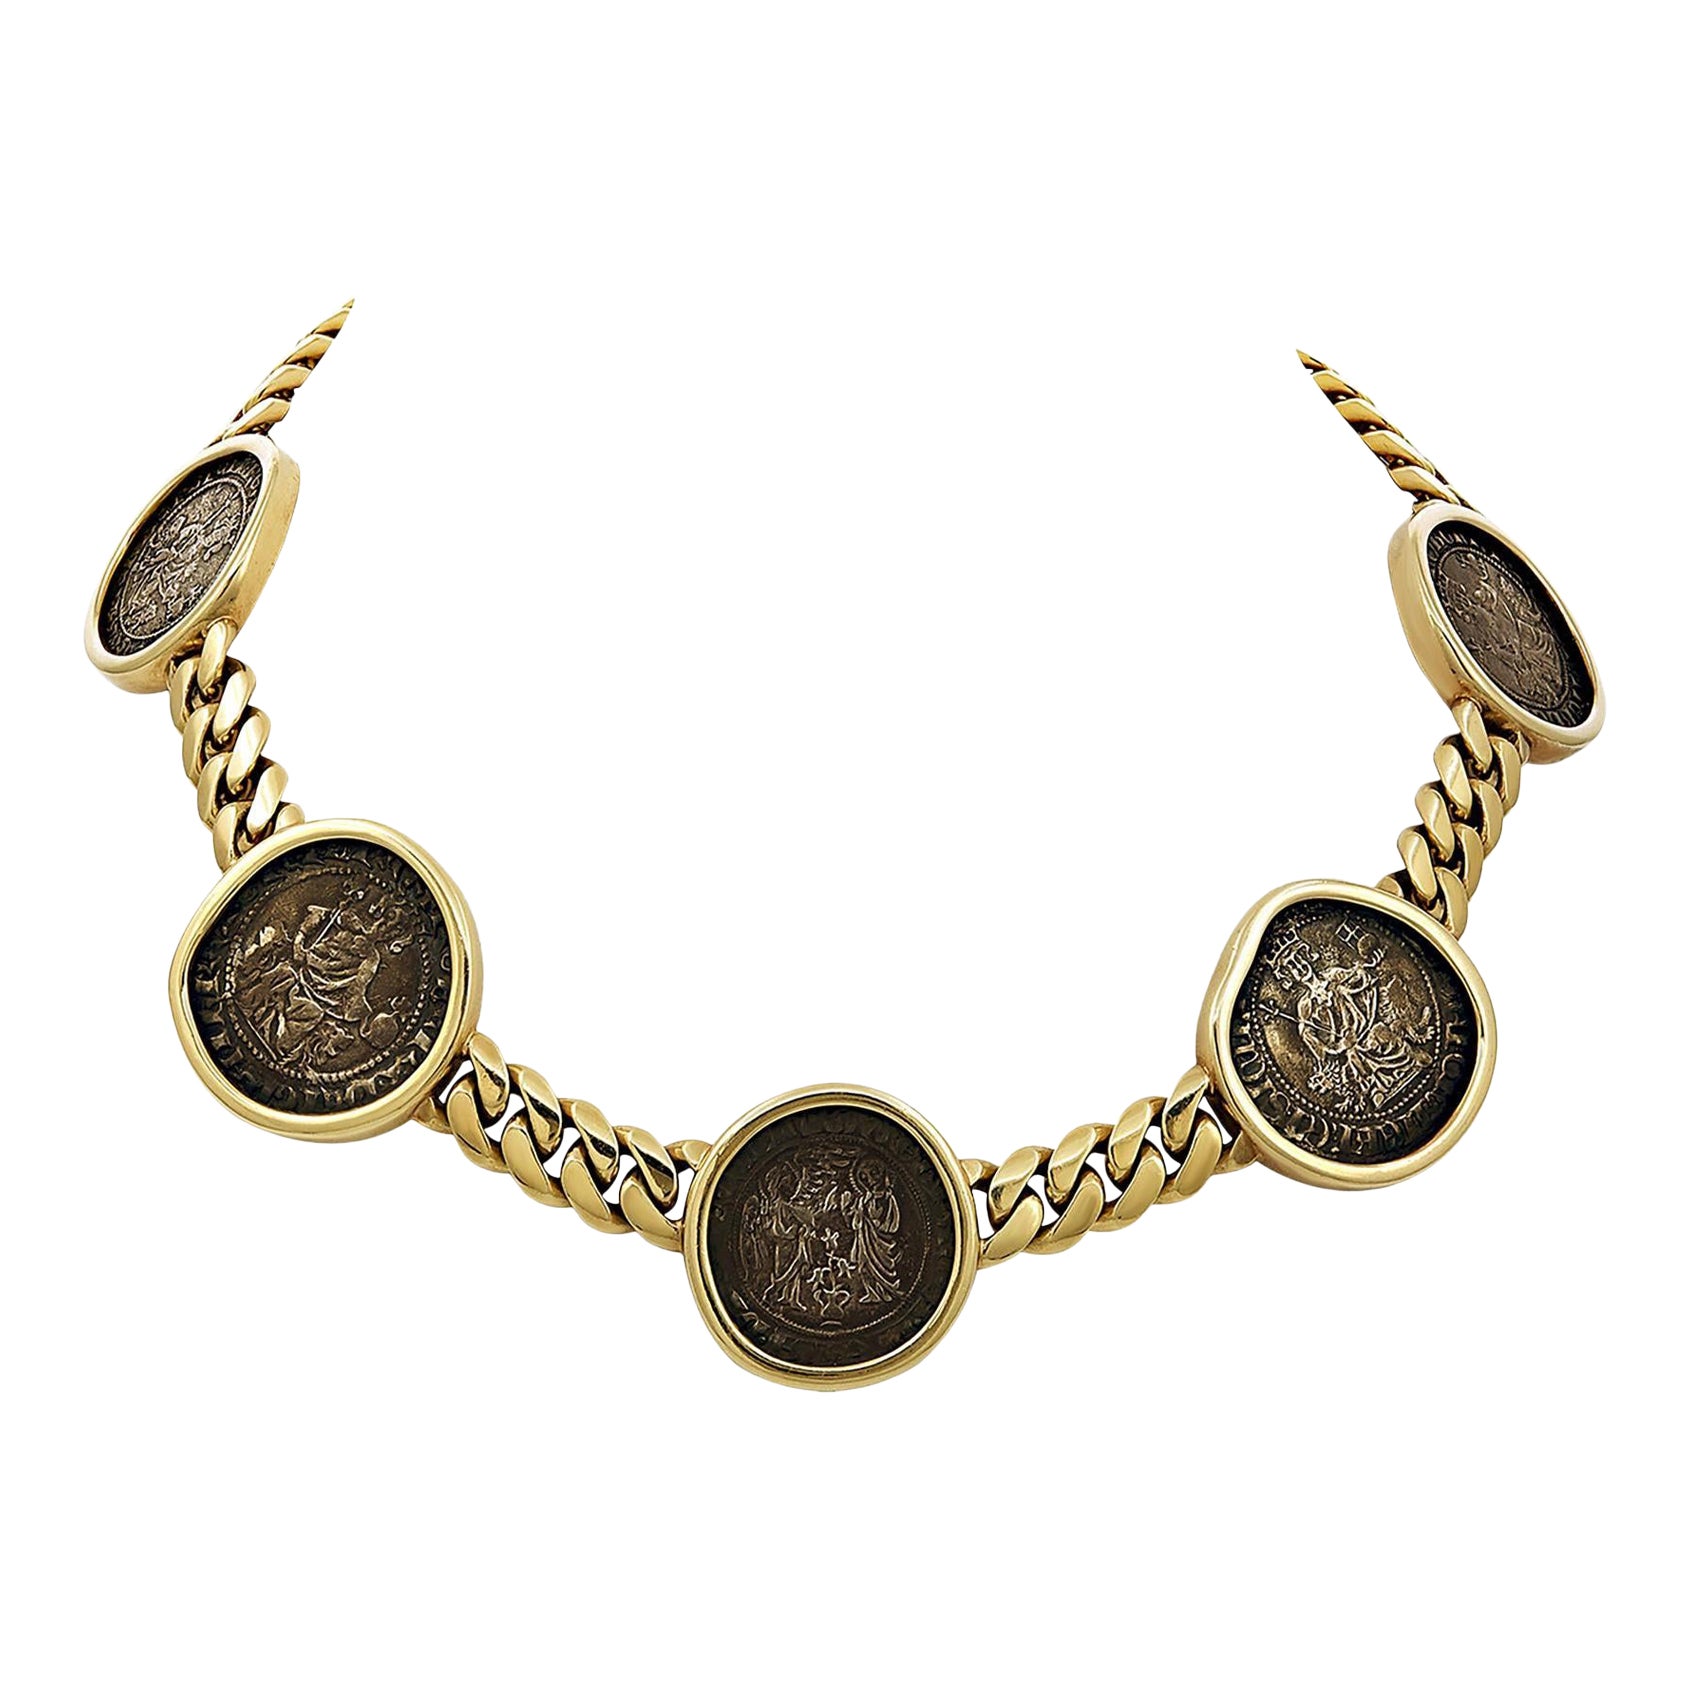 Bulgari 'Monete' Ancient Coin and Gold Necklace - FD Gallery